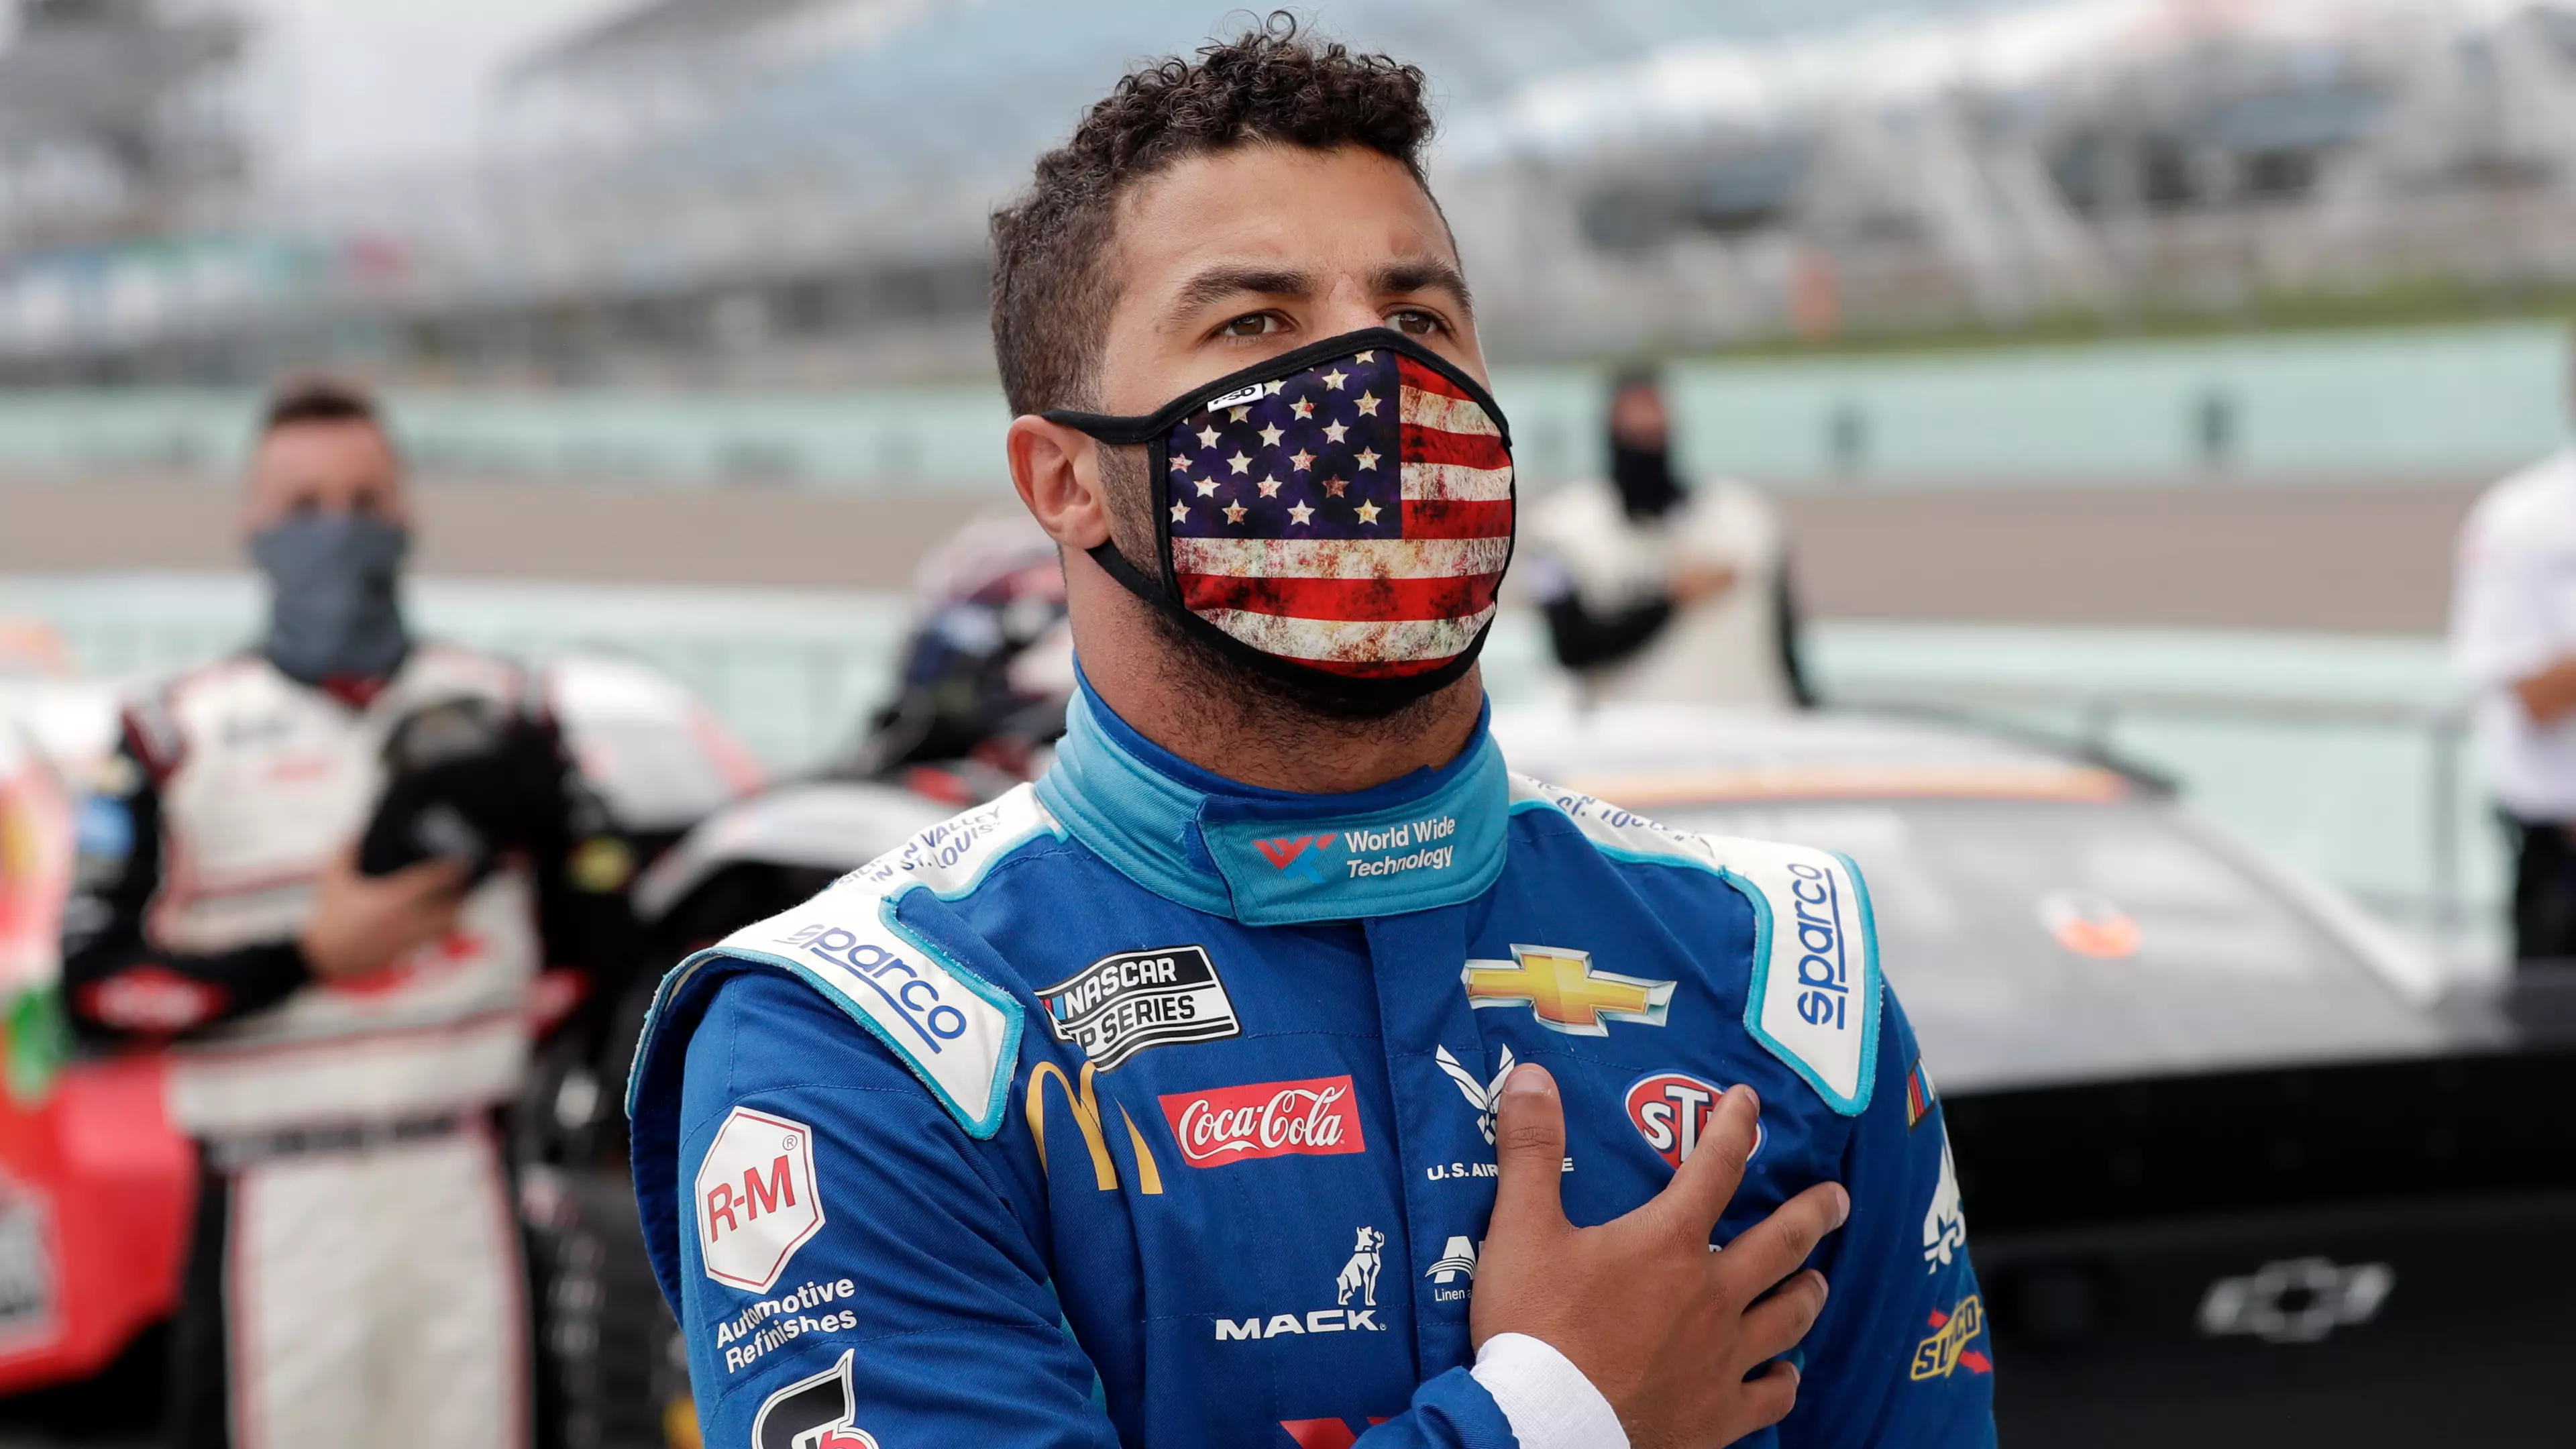 NASCAR Investigating After Noose Found Inside Bubba Wallace's Garage Stall